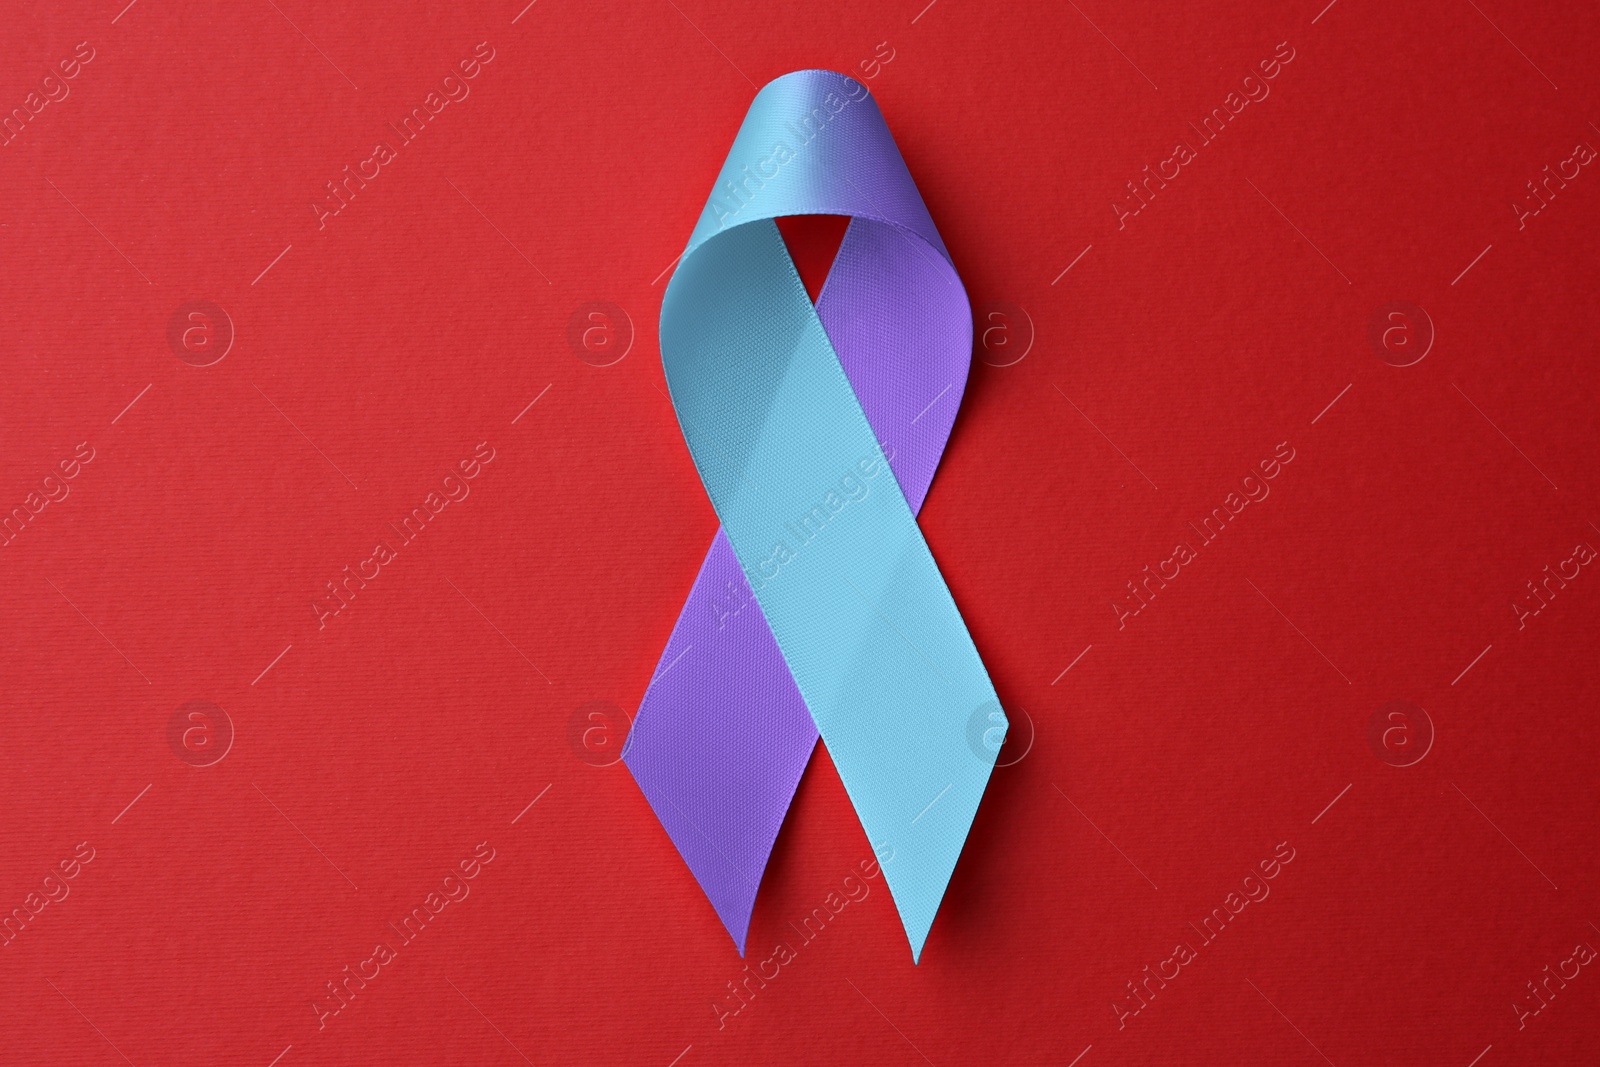 Image of World Arthritis Day. Blue and purple awareness ribbon on red background, top view